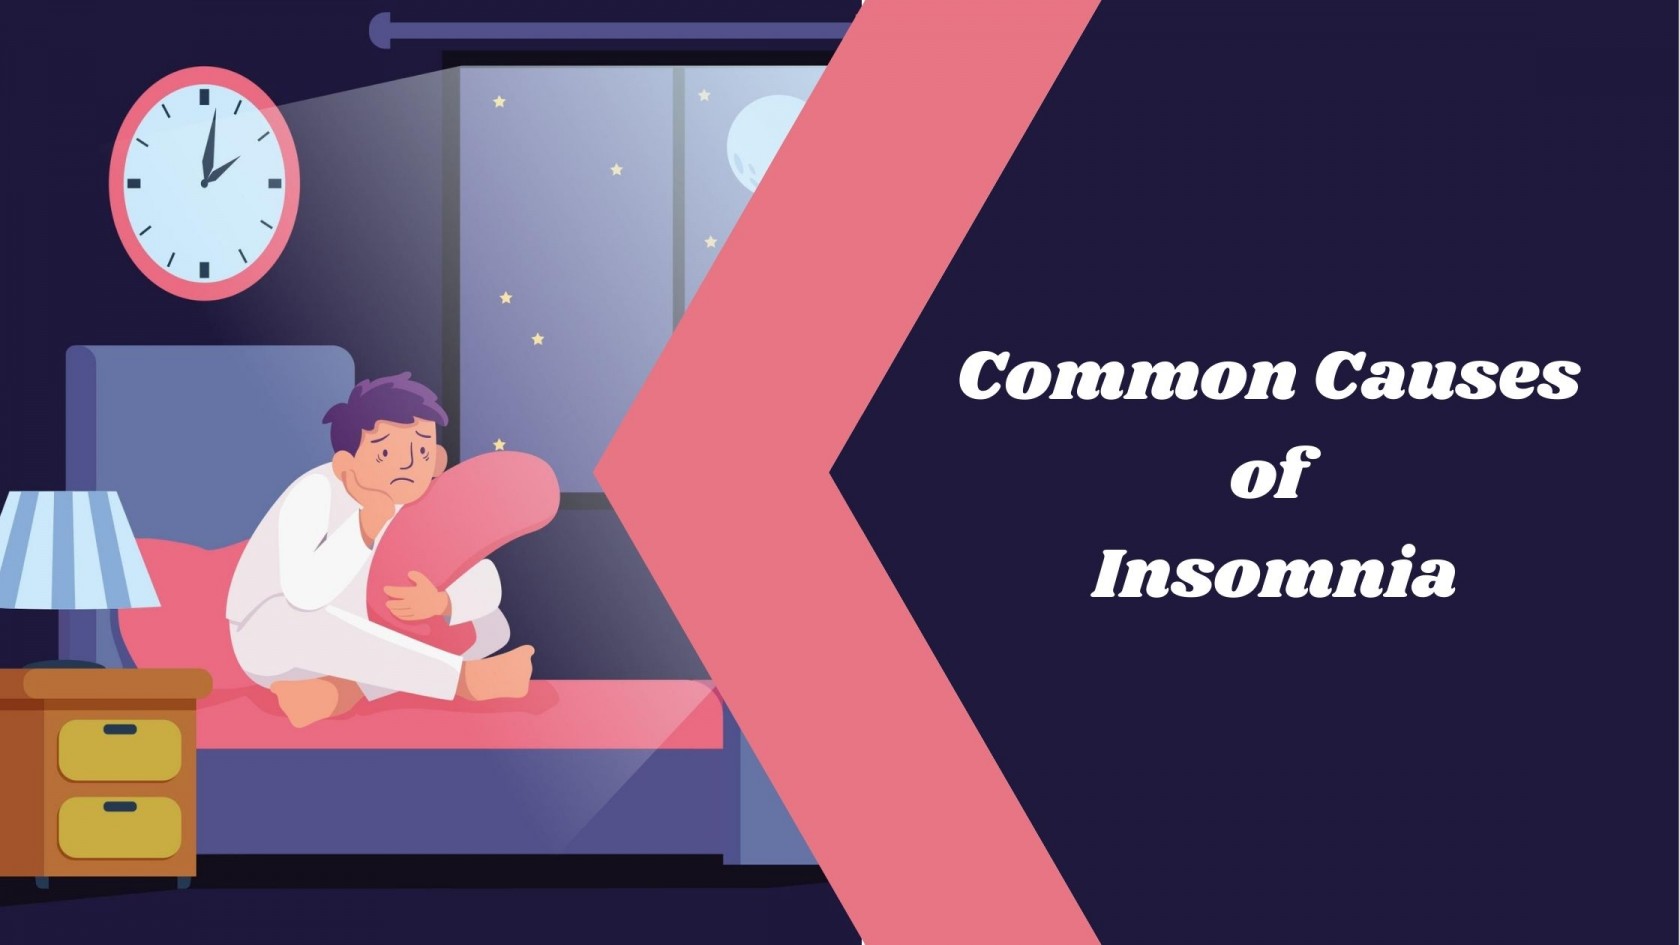 Common Causes of Insomnia